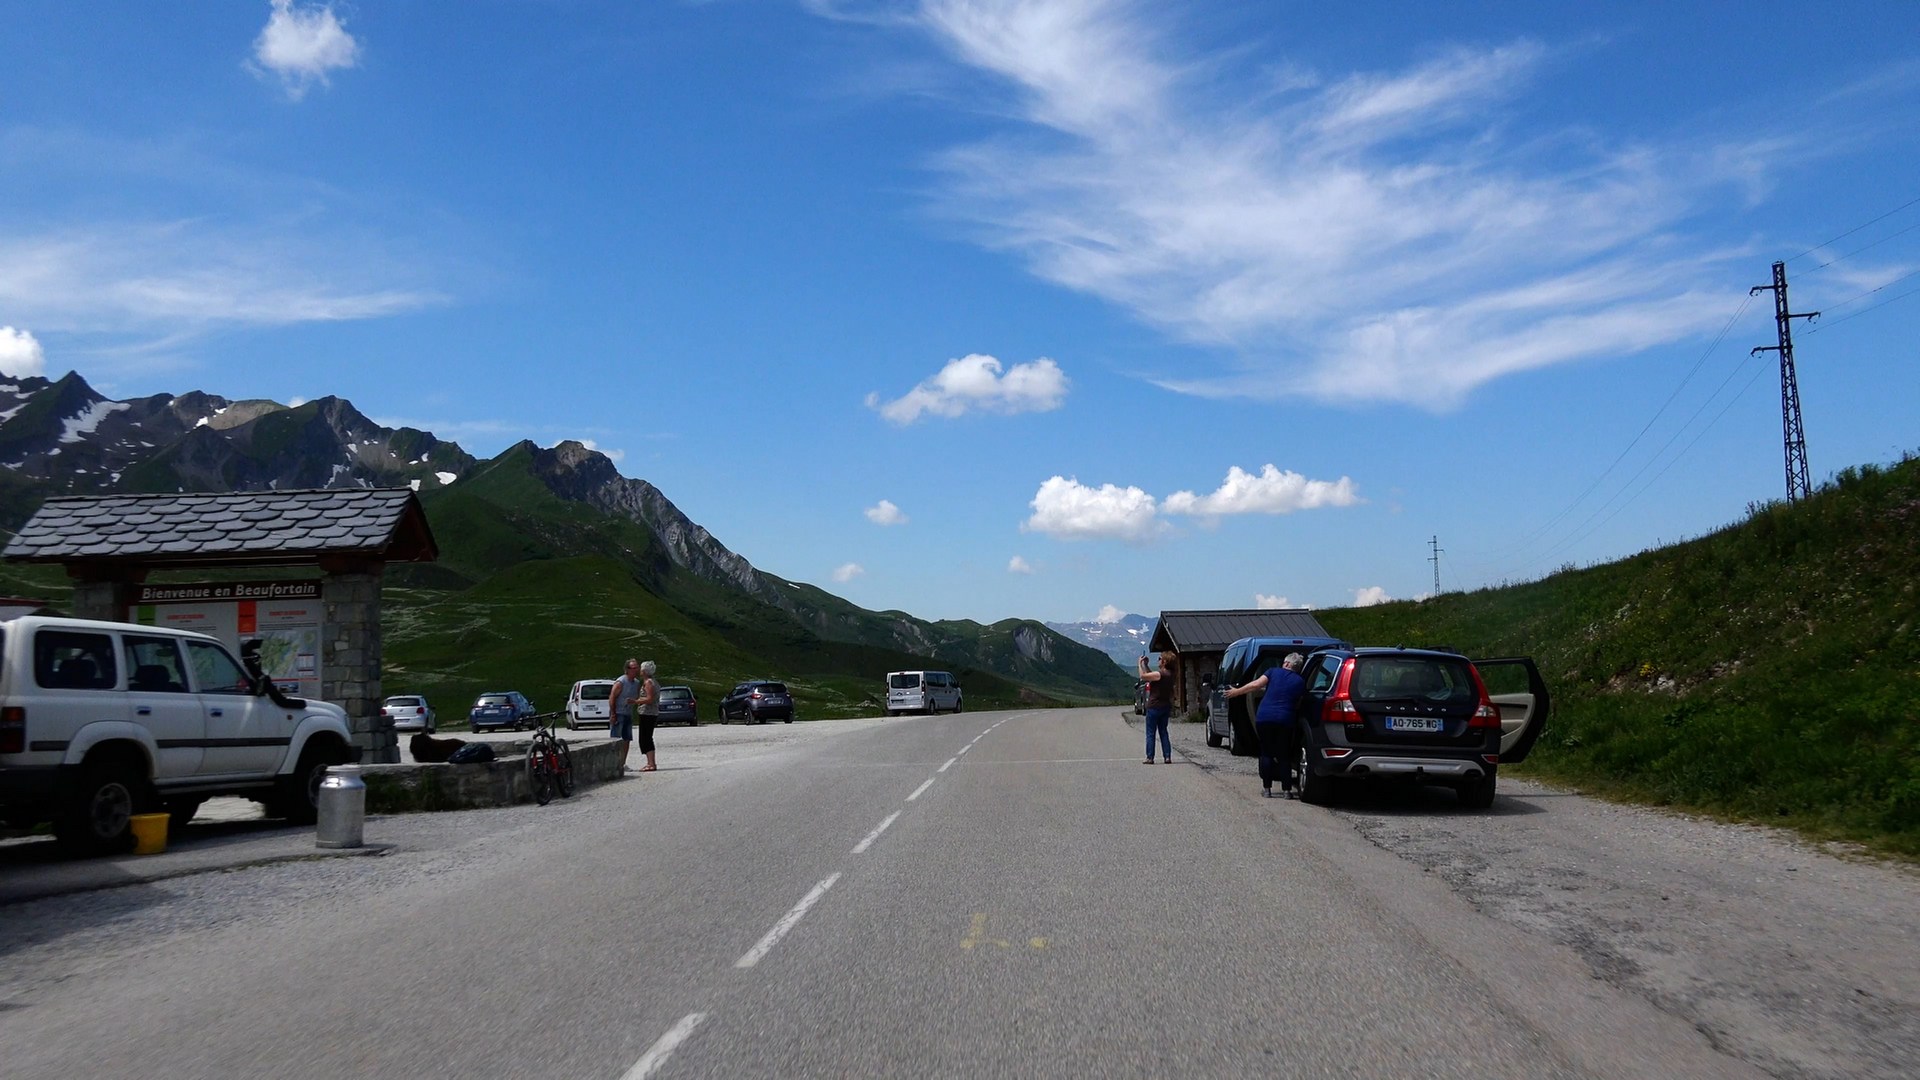 Part 15 of The Route of Grand Alps